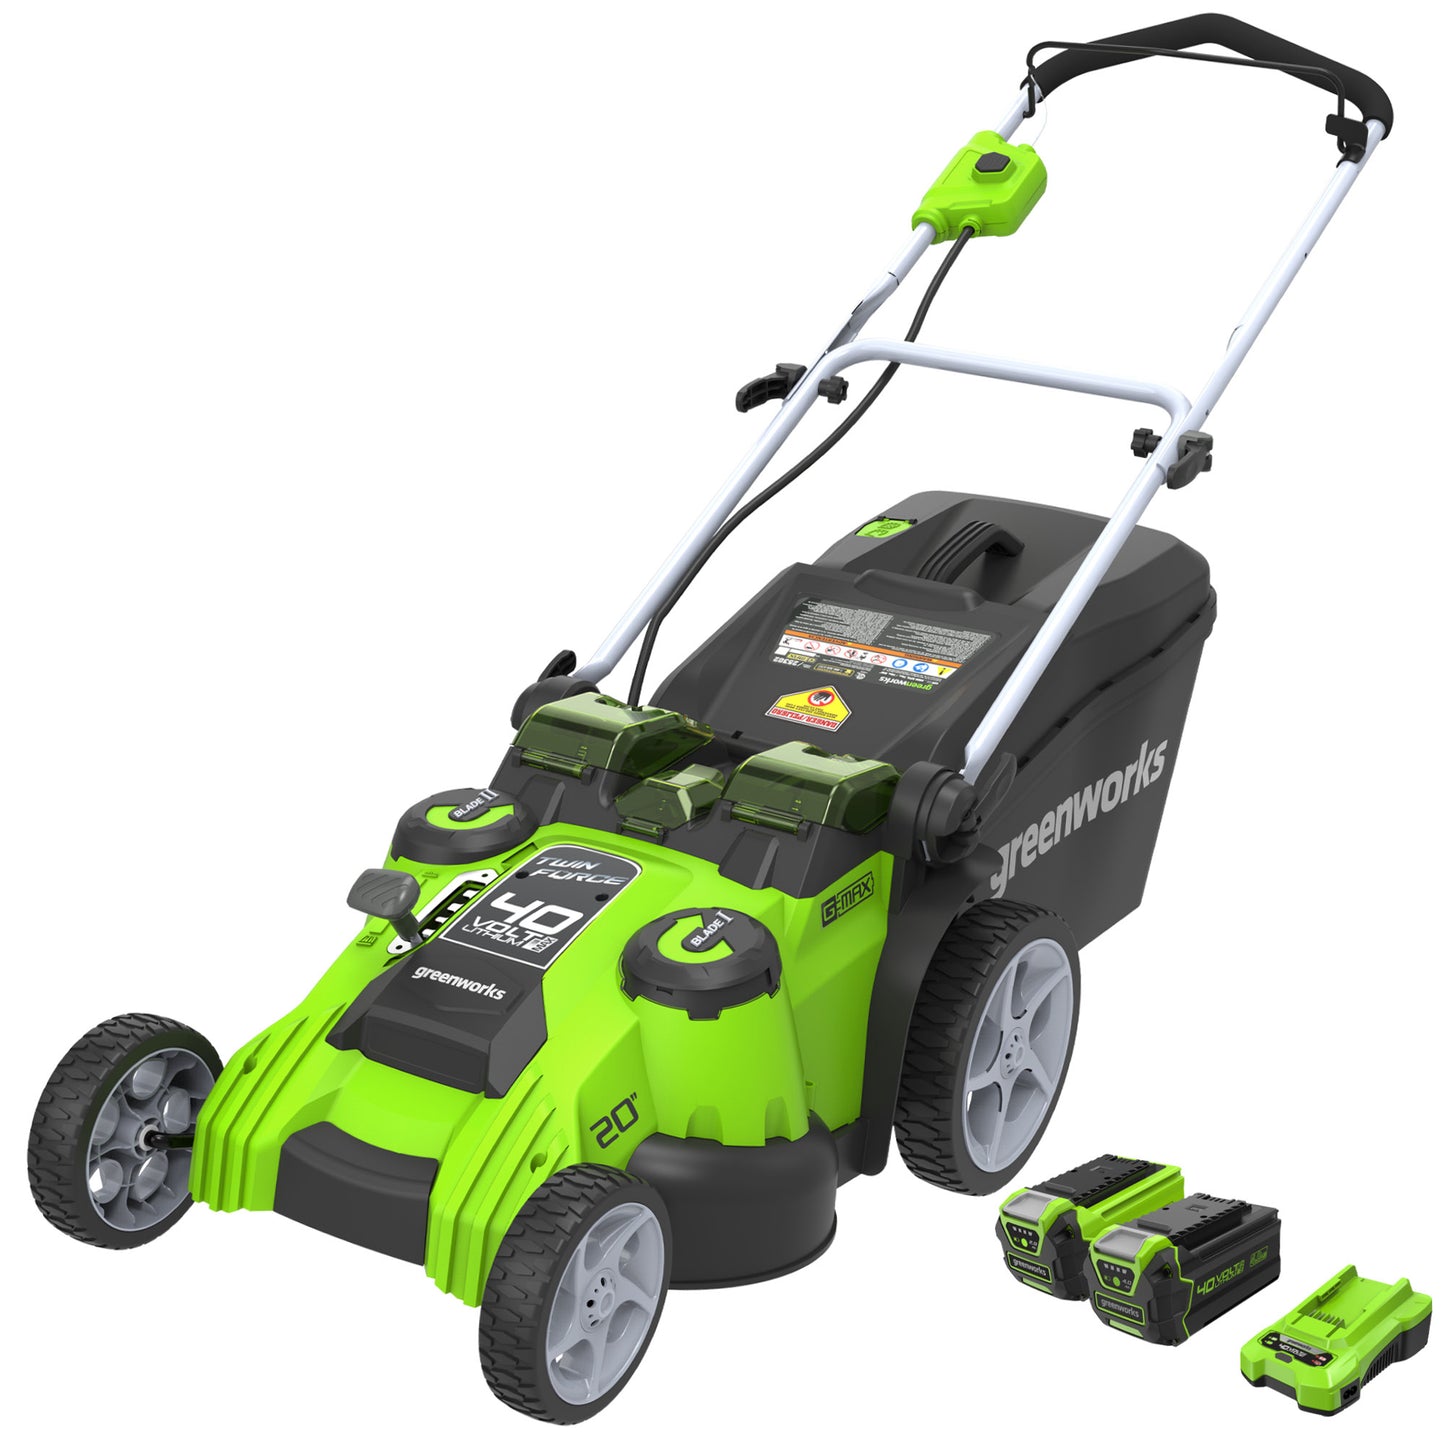 40V Max* Cordless Lawn Mower With Battery And Charger Included